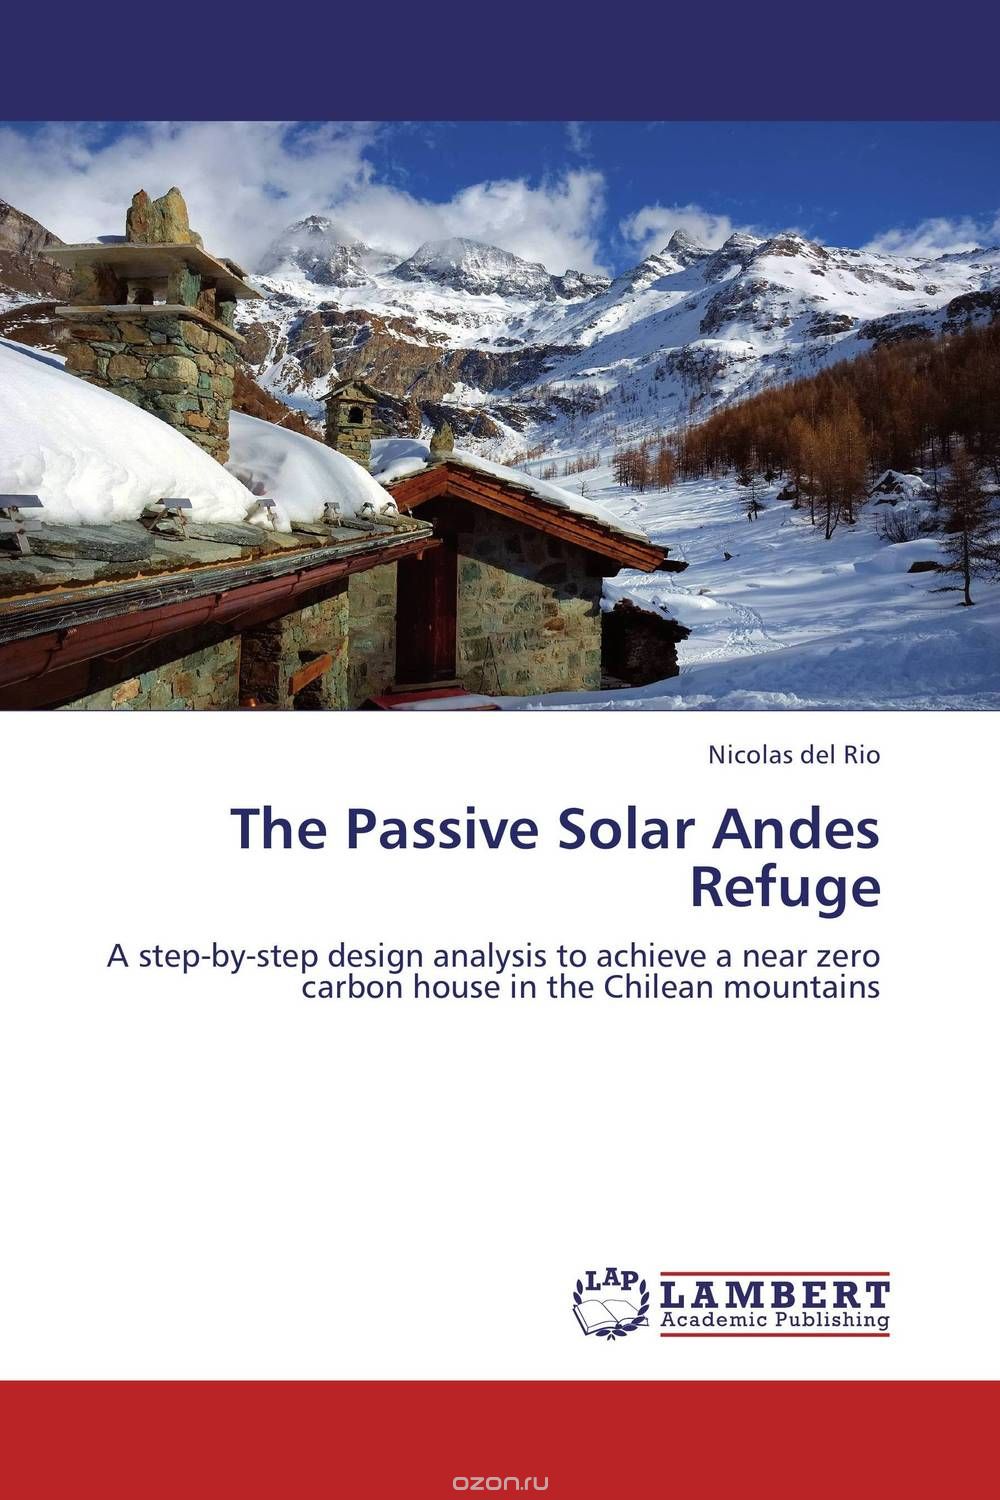 The Passive Solar Andes Refuge